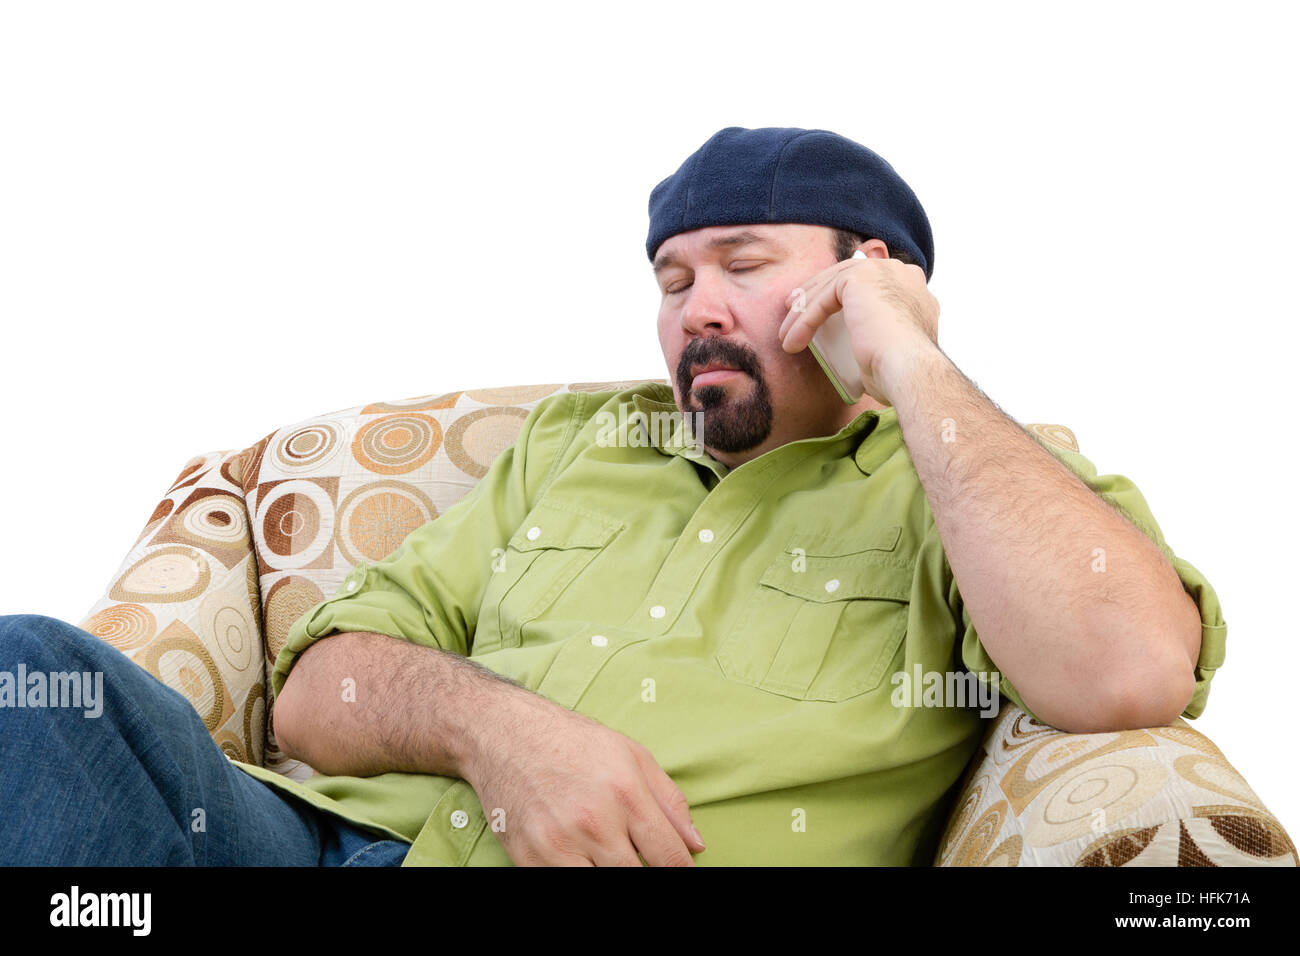 Bored overweight man in an armchair using a mobile, white background Stock Photo